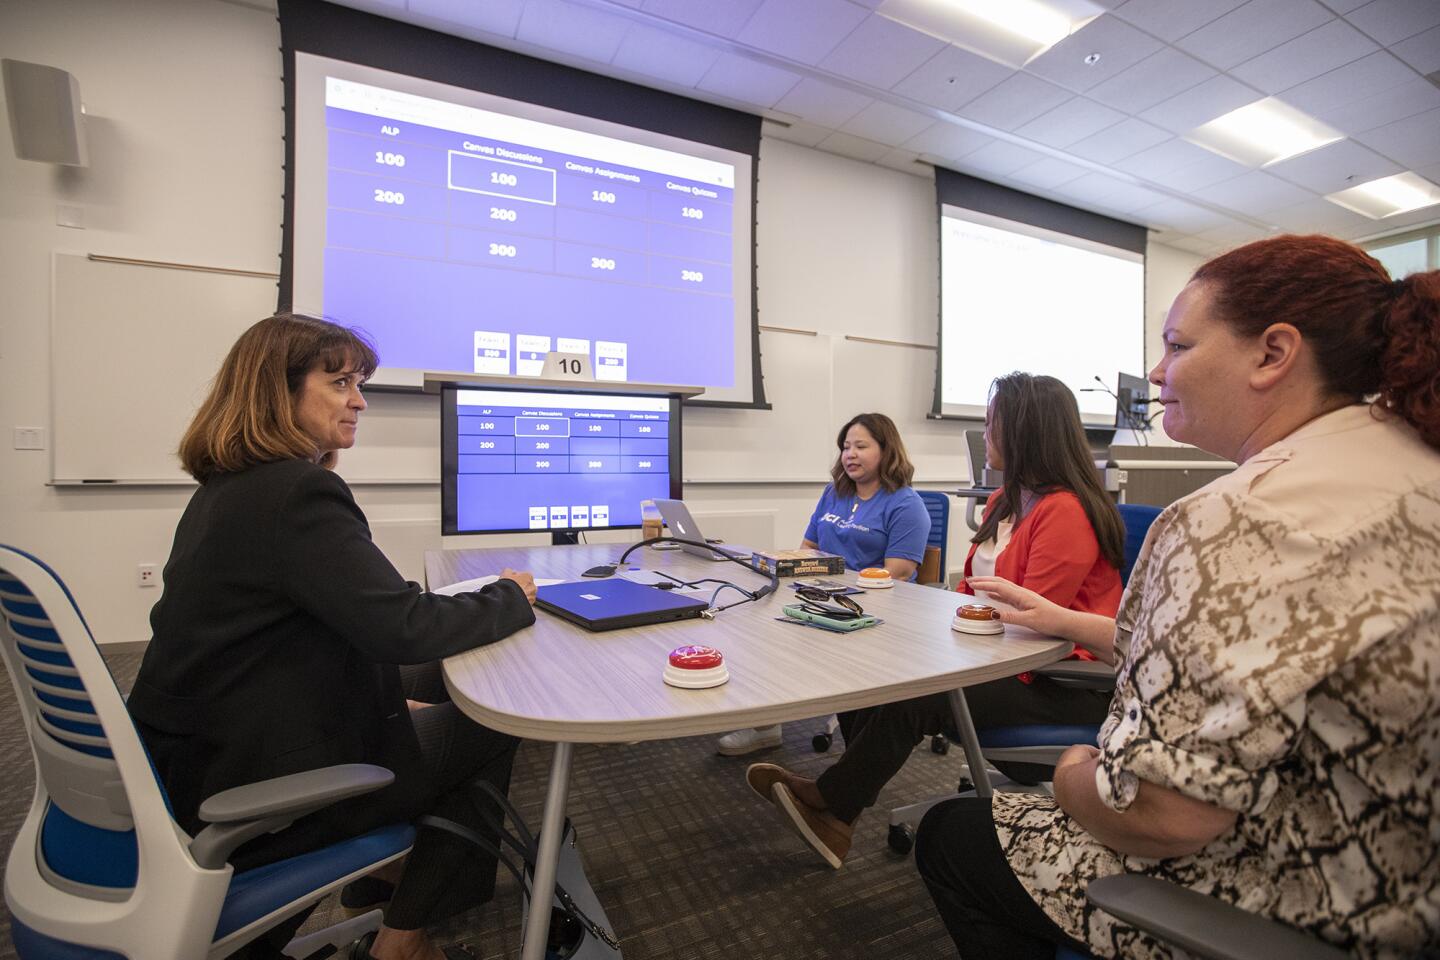 People use the Canvas Learning Management System to play "Jeopardy" in an "active learning" classroom at the new Anteater Learning Pavilion on Tuesday.